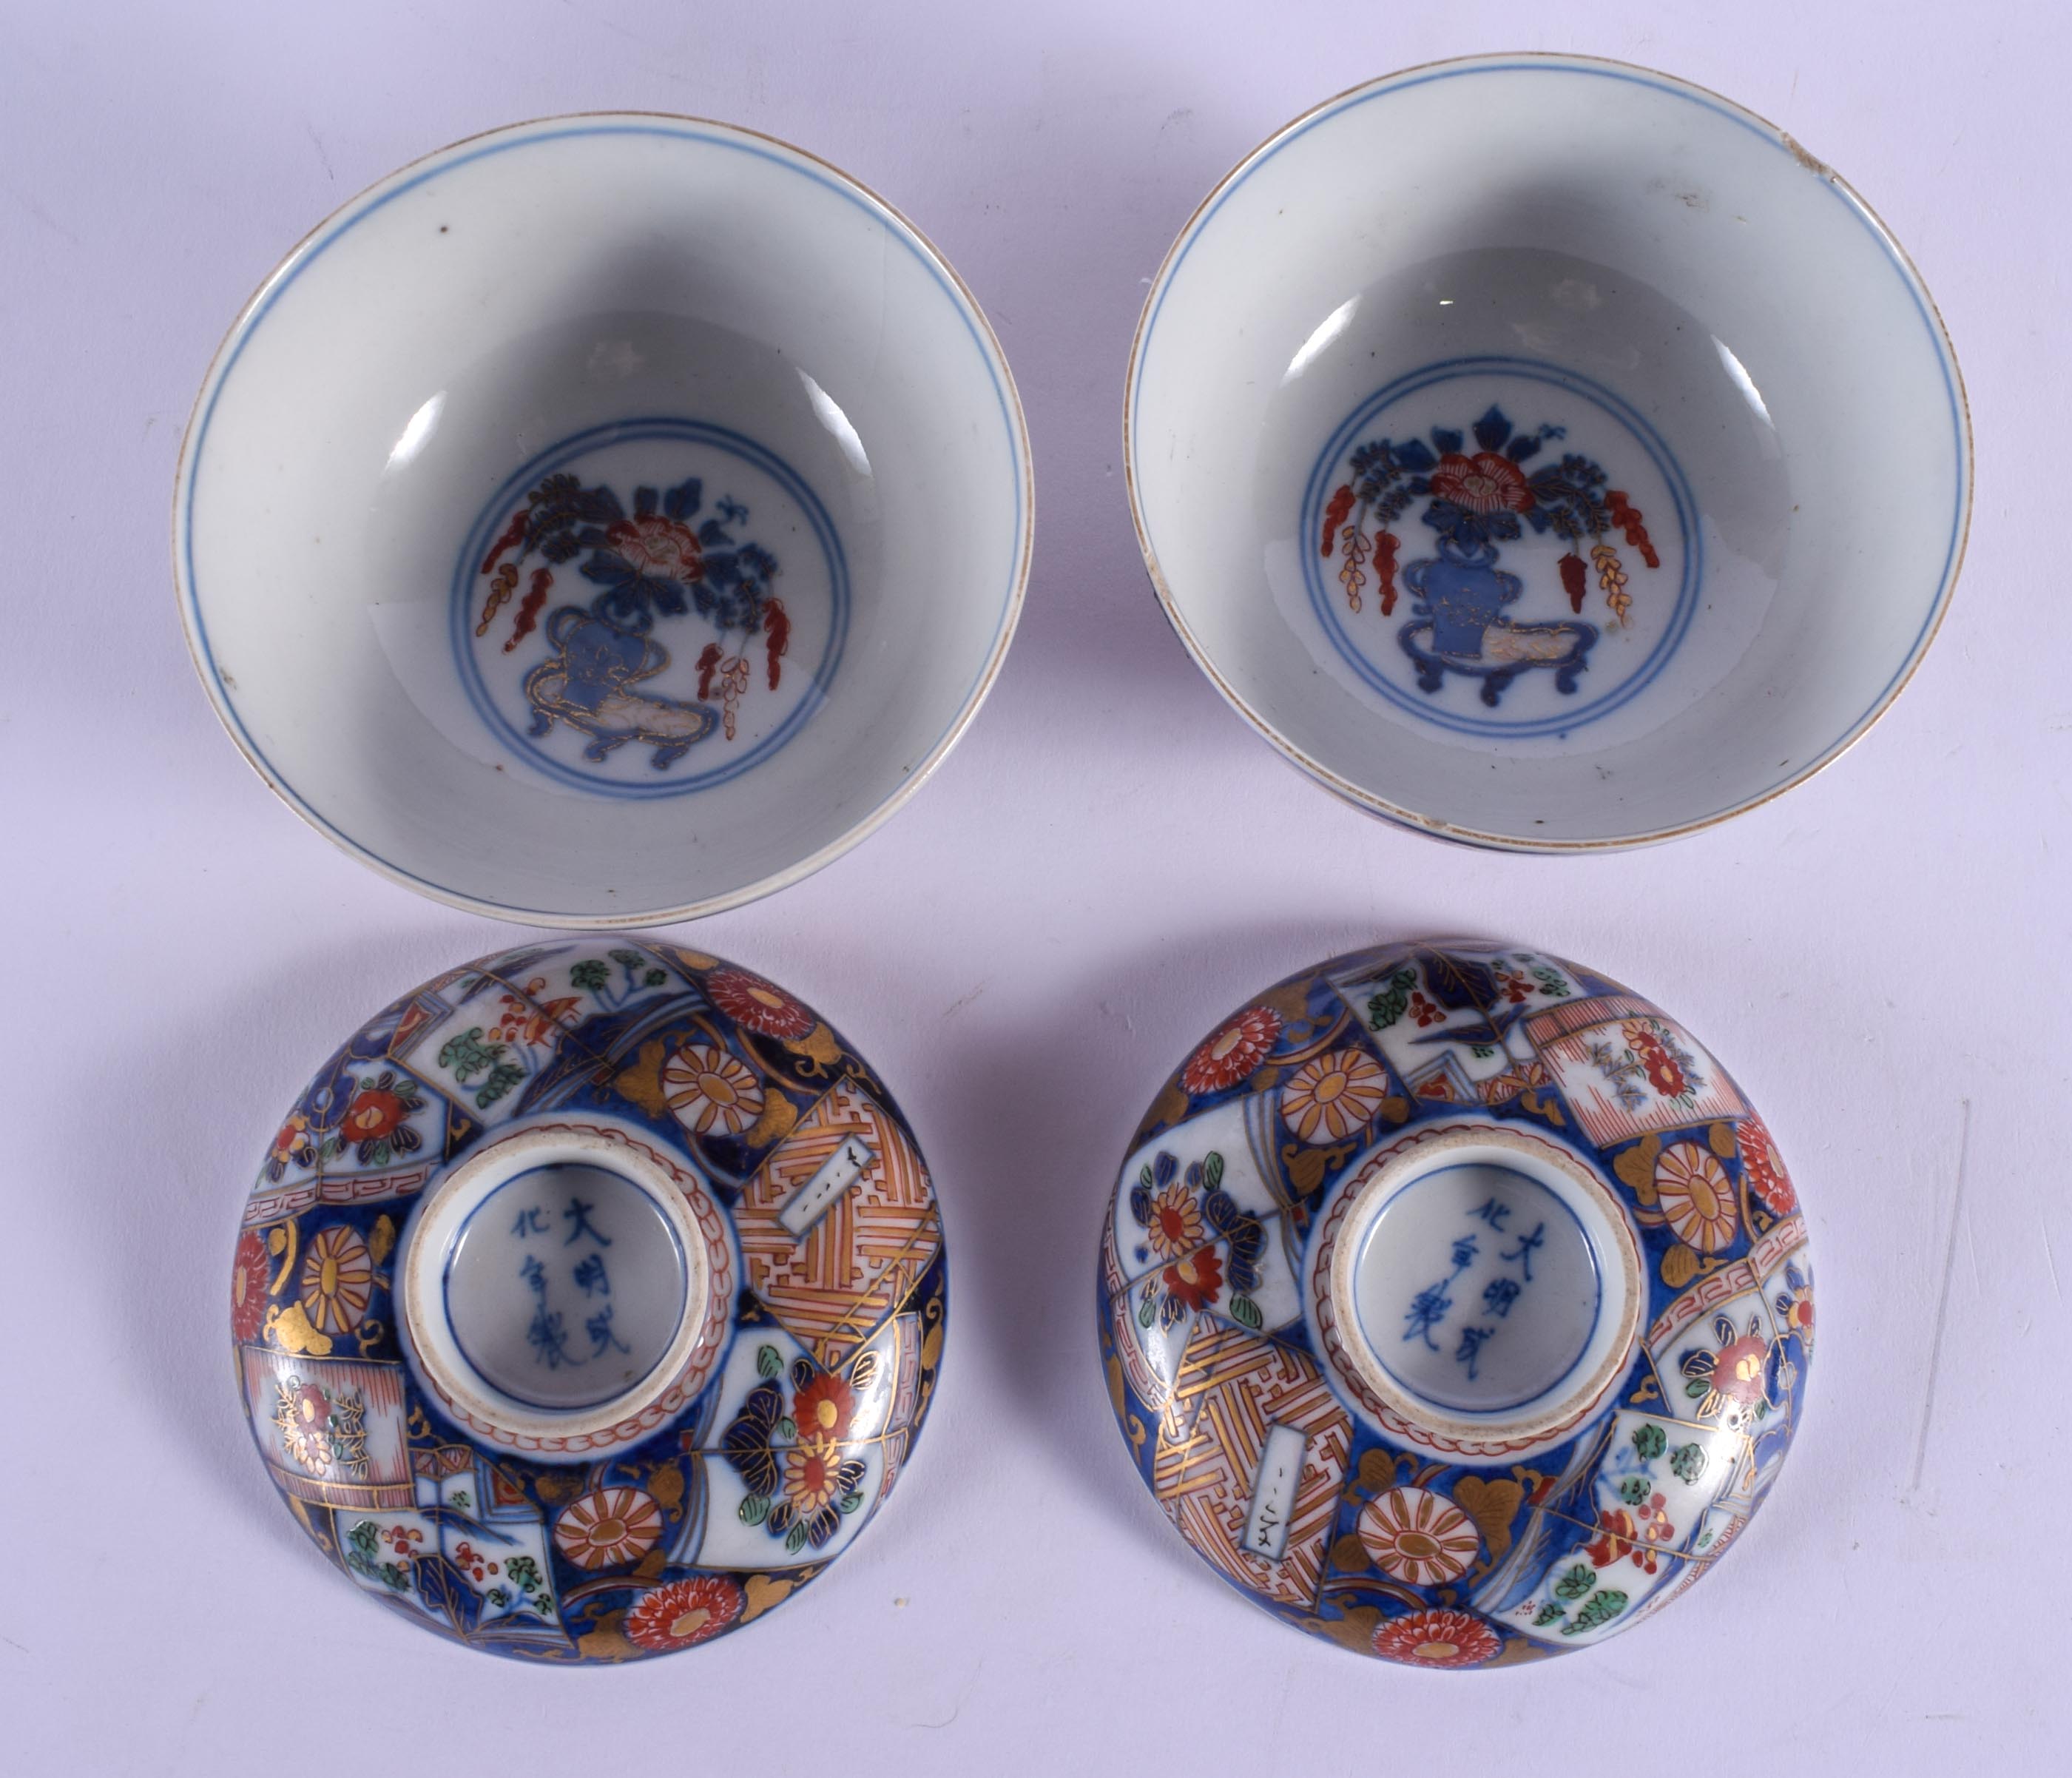 A PAIR OF 19TH CENTURY JAPANESE MEIJI PERIOD IMARI BOWLS AND COVERS painted with floral sprays. 10 c - Image 3 of 4